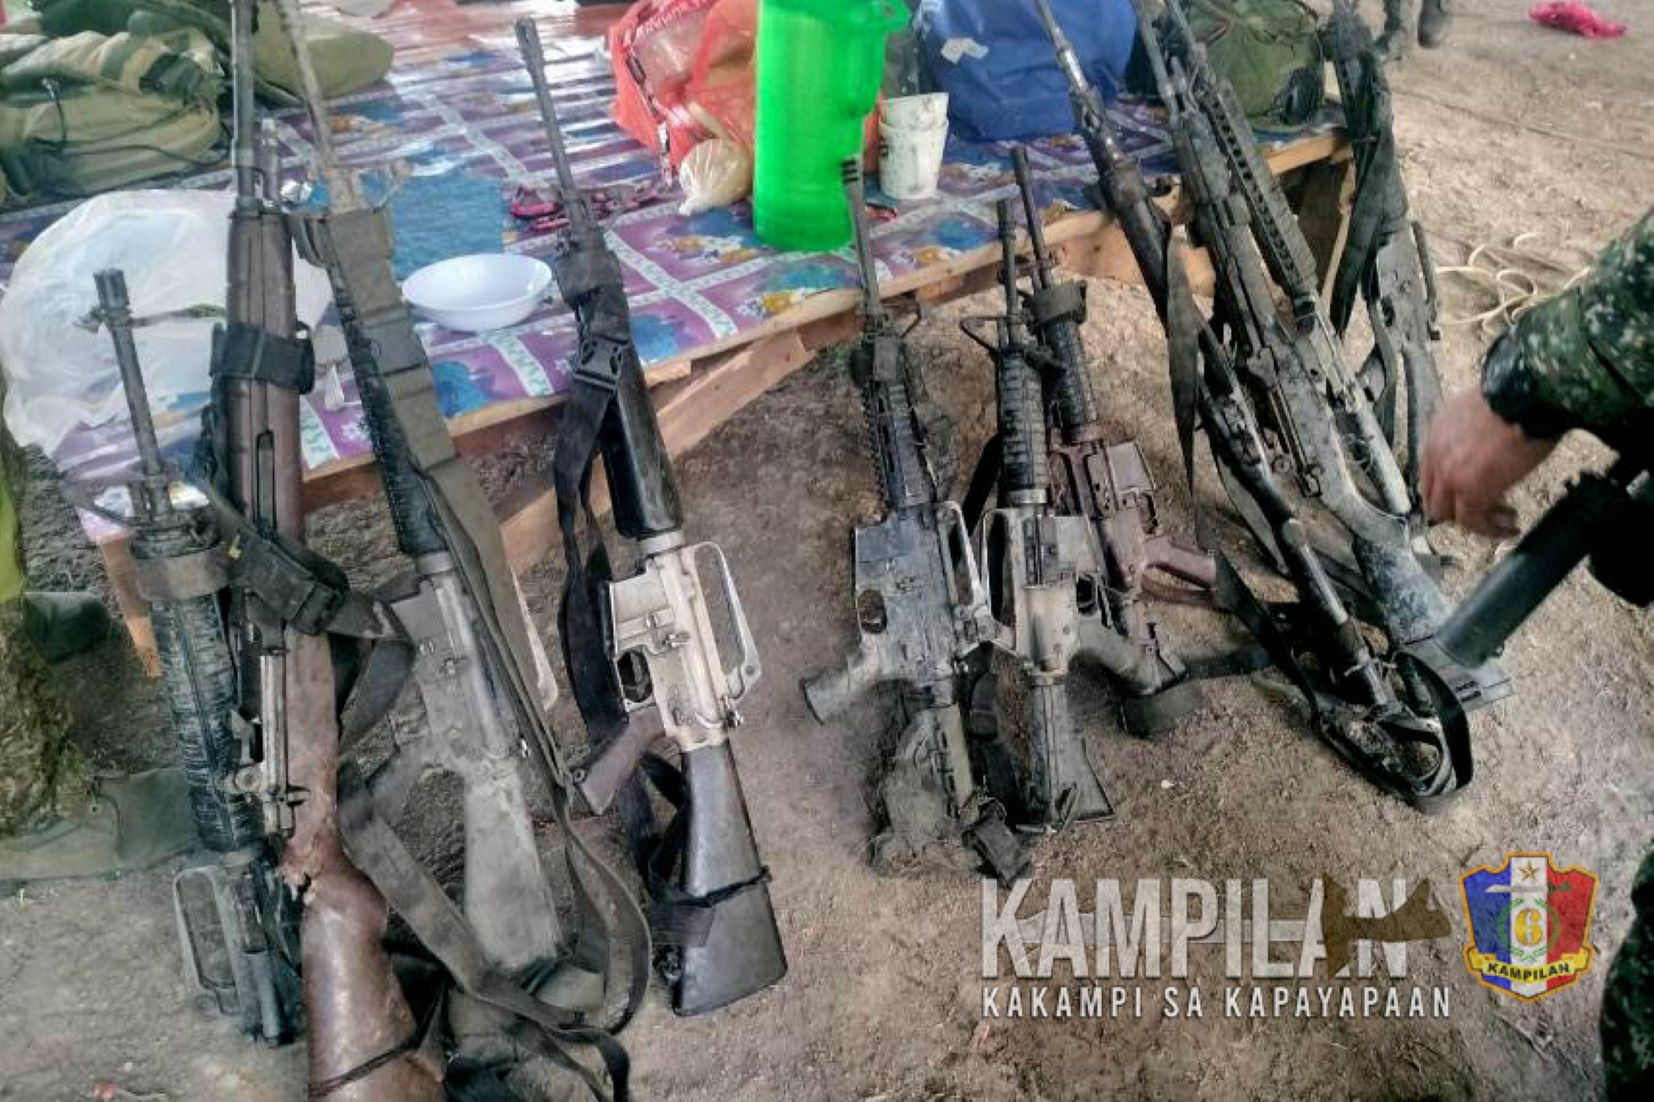 Philippine Terrorist Group Leader, 11 Others Killed In Clash